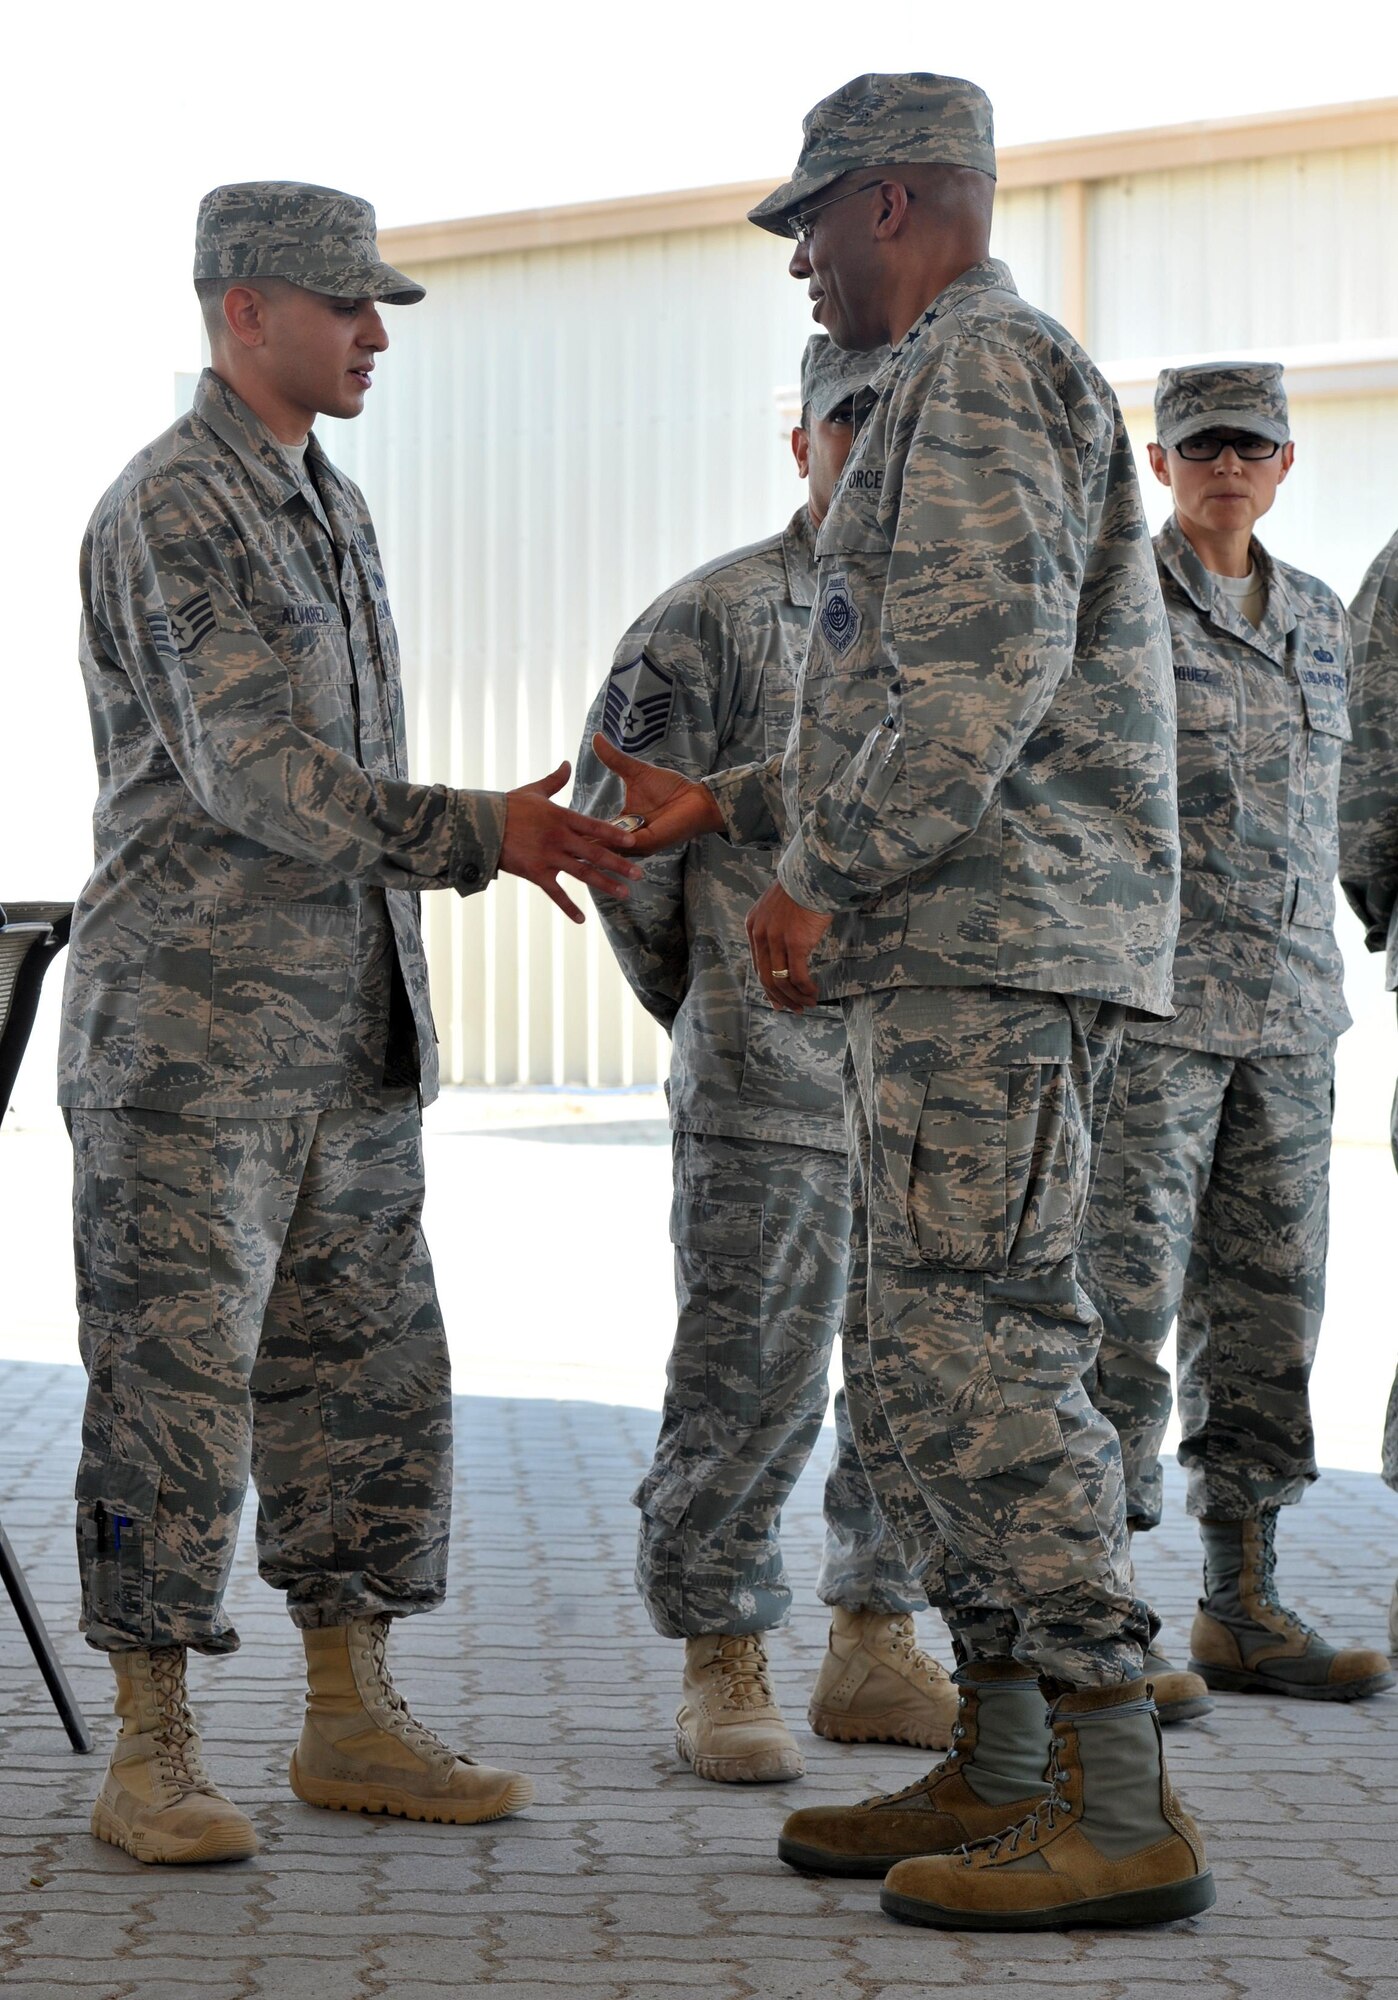 Lt. Gen. Charles Brown Jr., commander of Air Forces Central Command, presents a commander's coin to Staff Sgt. Ryan, 380th Expeditionary Operations Support Squadron, at an undisclosed location in Southwest Asia, Feb. 11, 2016. Brown visited the wing to congratulate the 380th on their operations leading up to the destruction of an Islamic State of the Levant banking facility during an airstrike in the month prior. (U.S. Air Force photo by Staff Sgt. Kentavist Brackin/released)